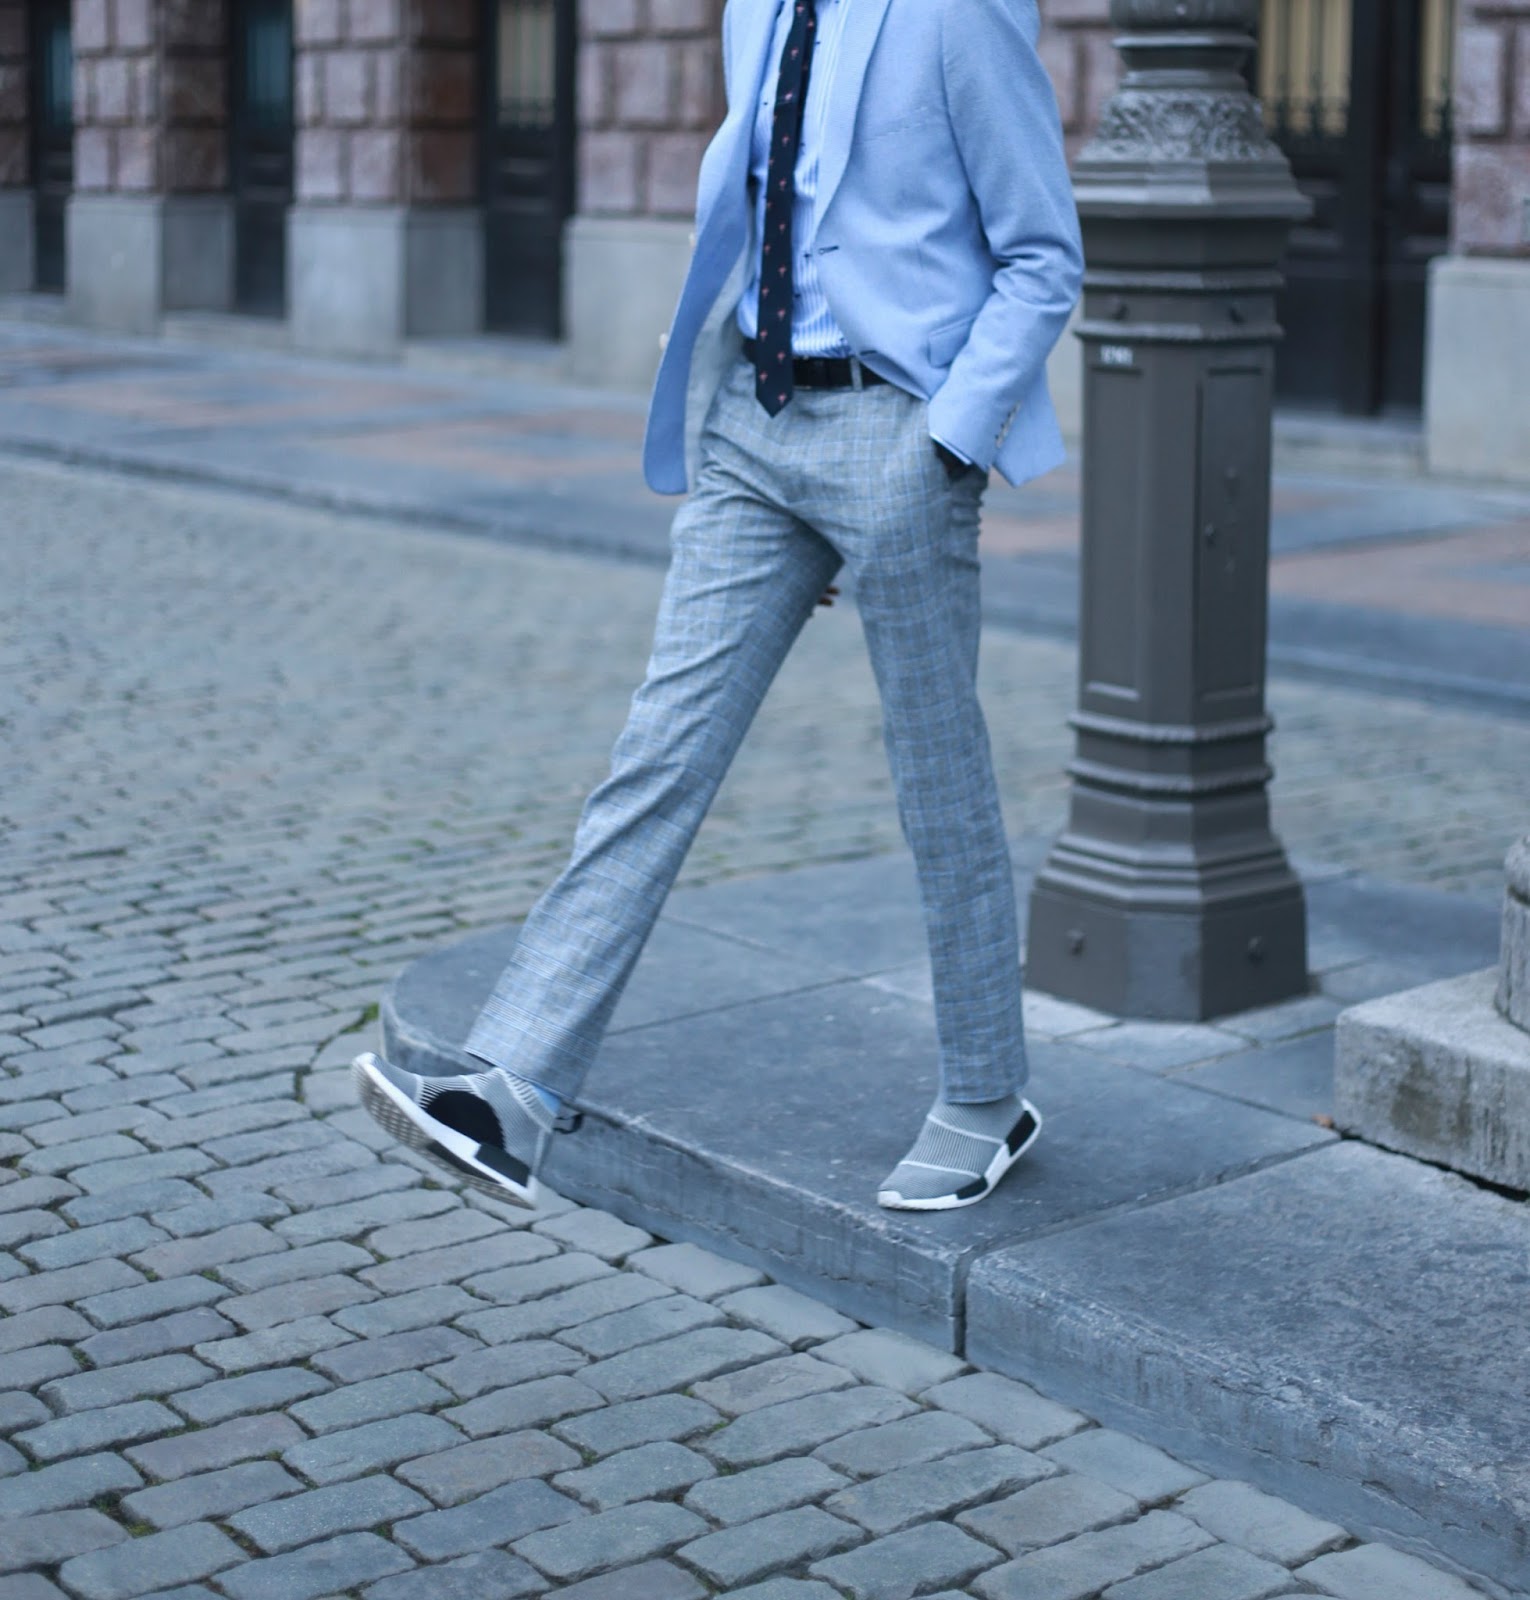 Business Chic men's look we fashion + adidas nmd sneakers // suits and sneakers - street style antwerp by jonthegold - photo by sofia dossantos